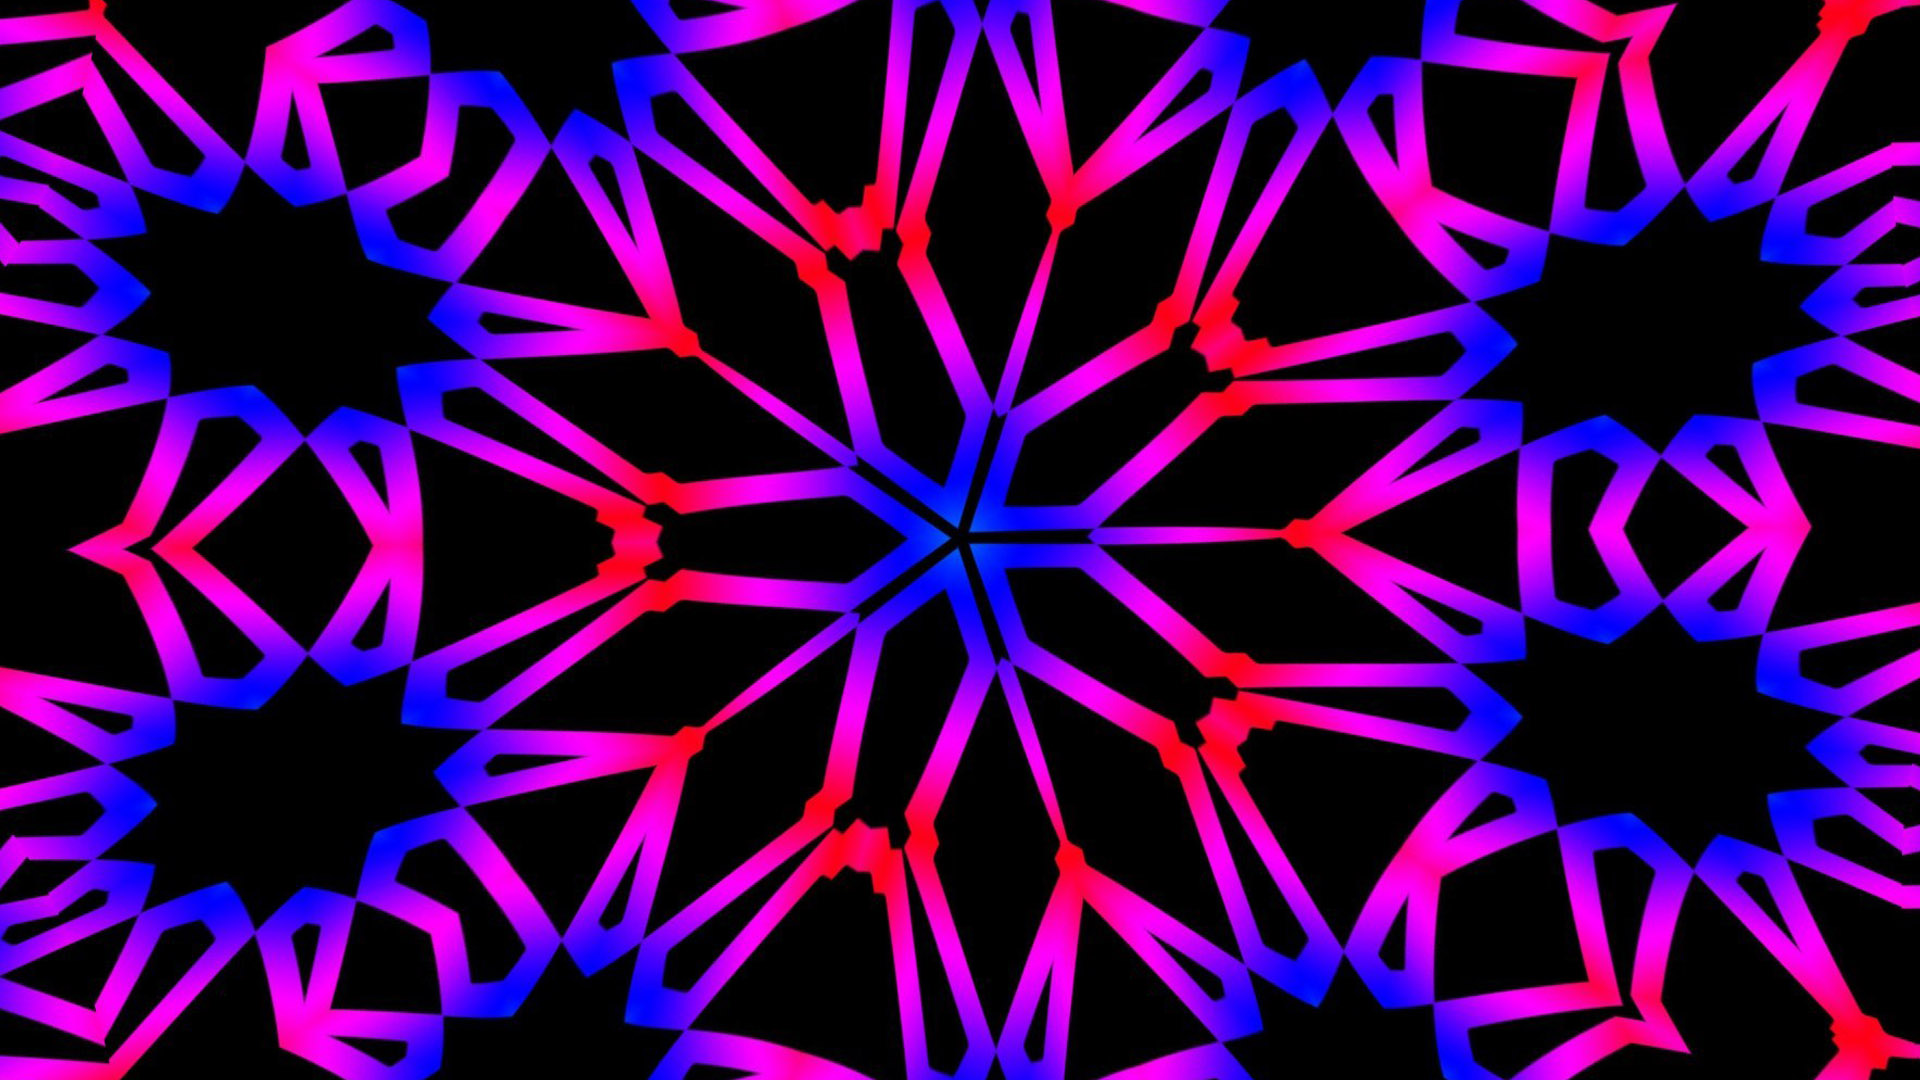 Abstract Artistic Colors Digital Art Kaleidoscope Neon Pattern Psychedelic 1920x1080